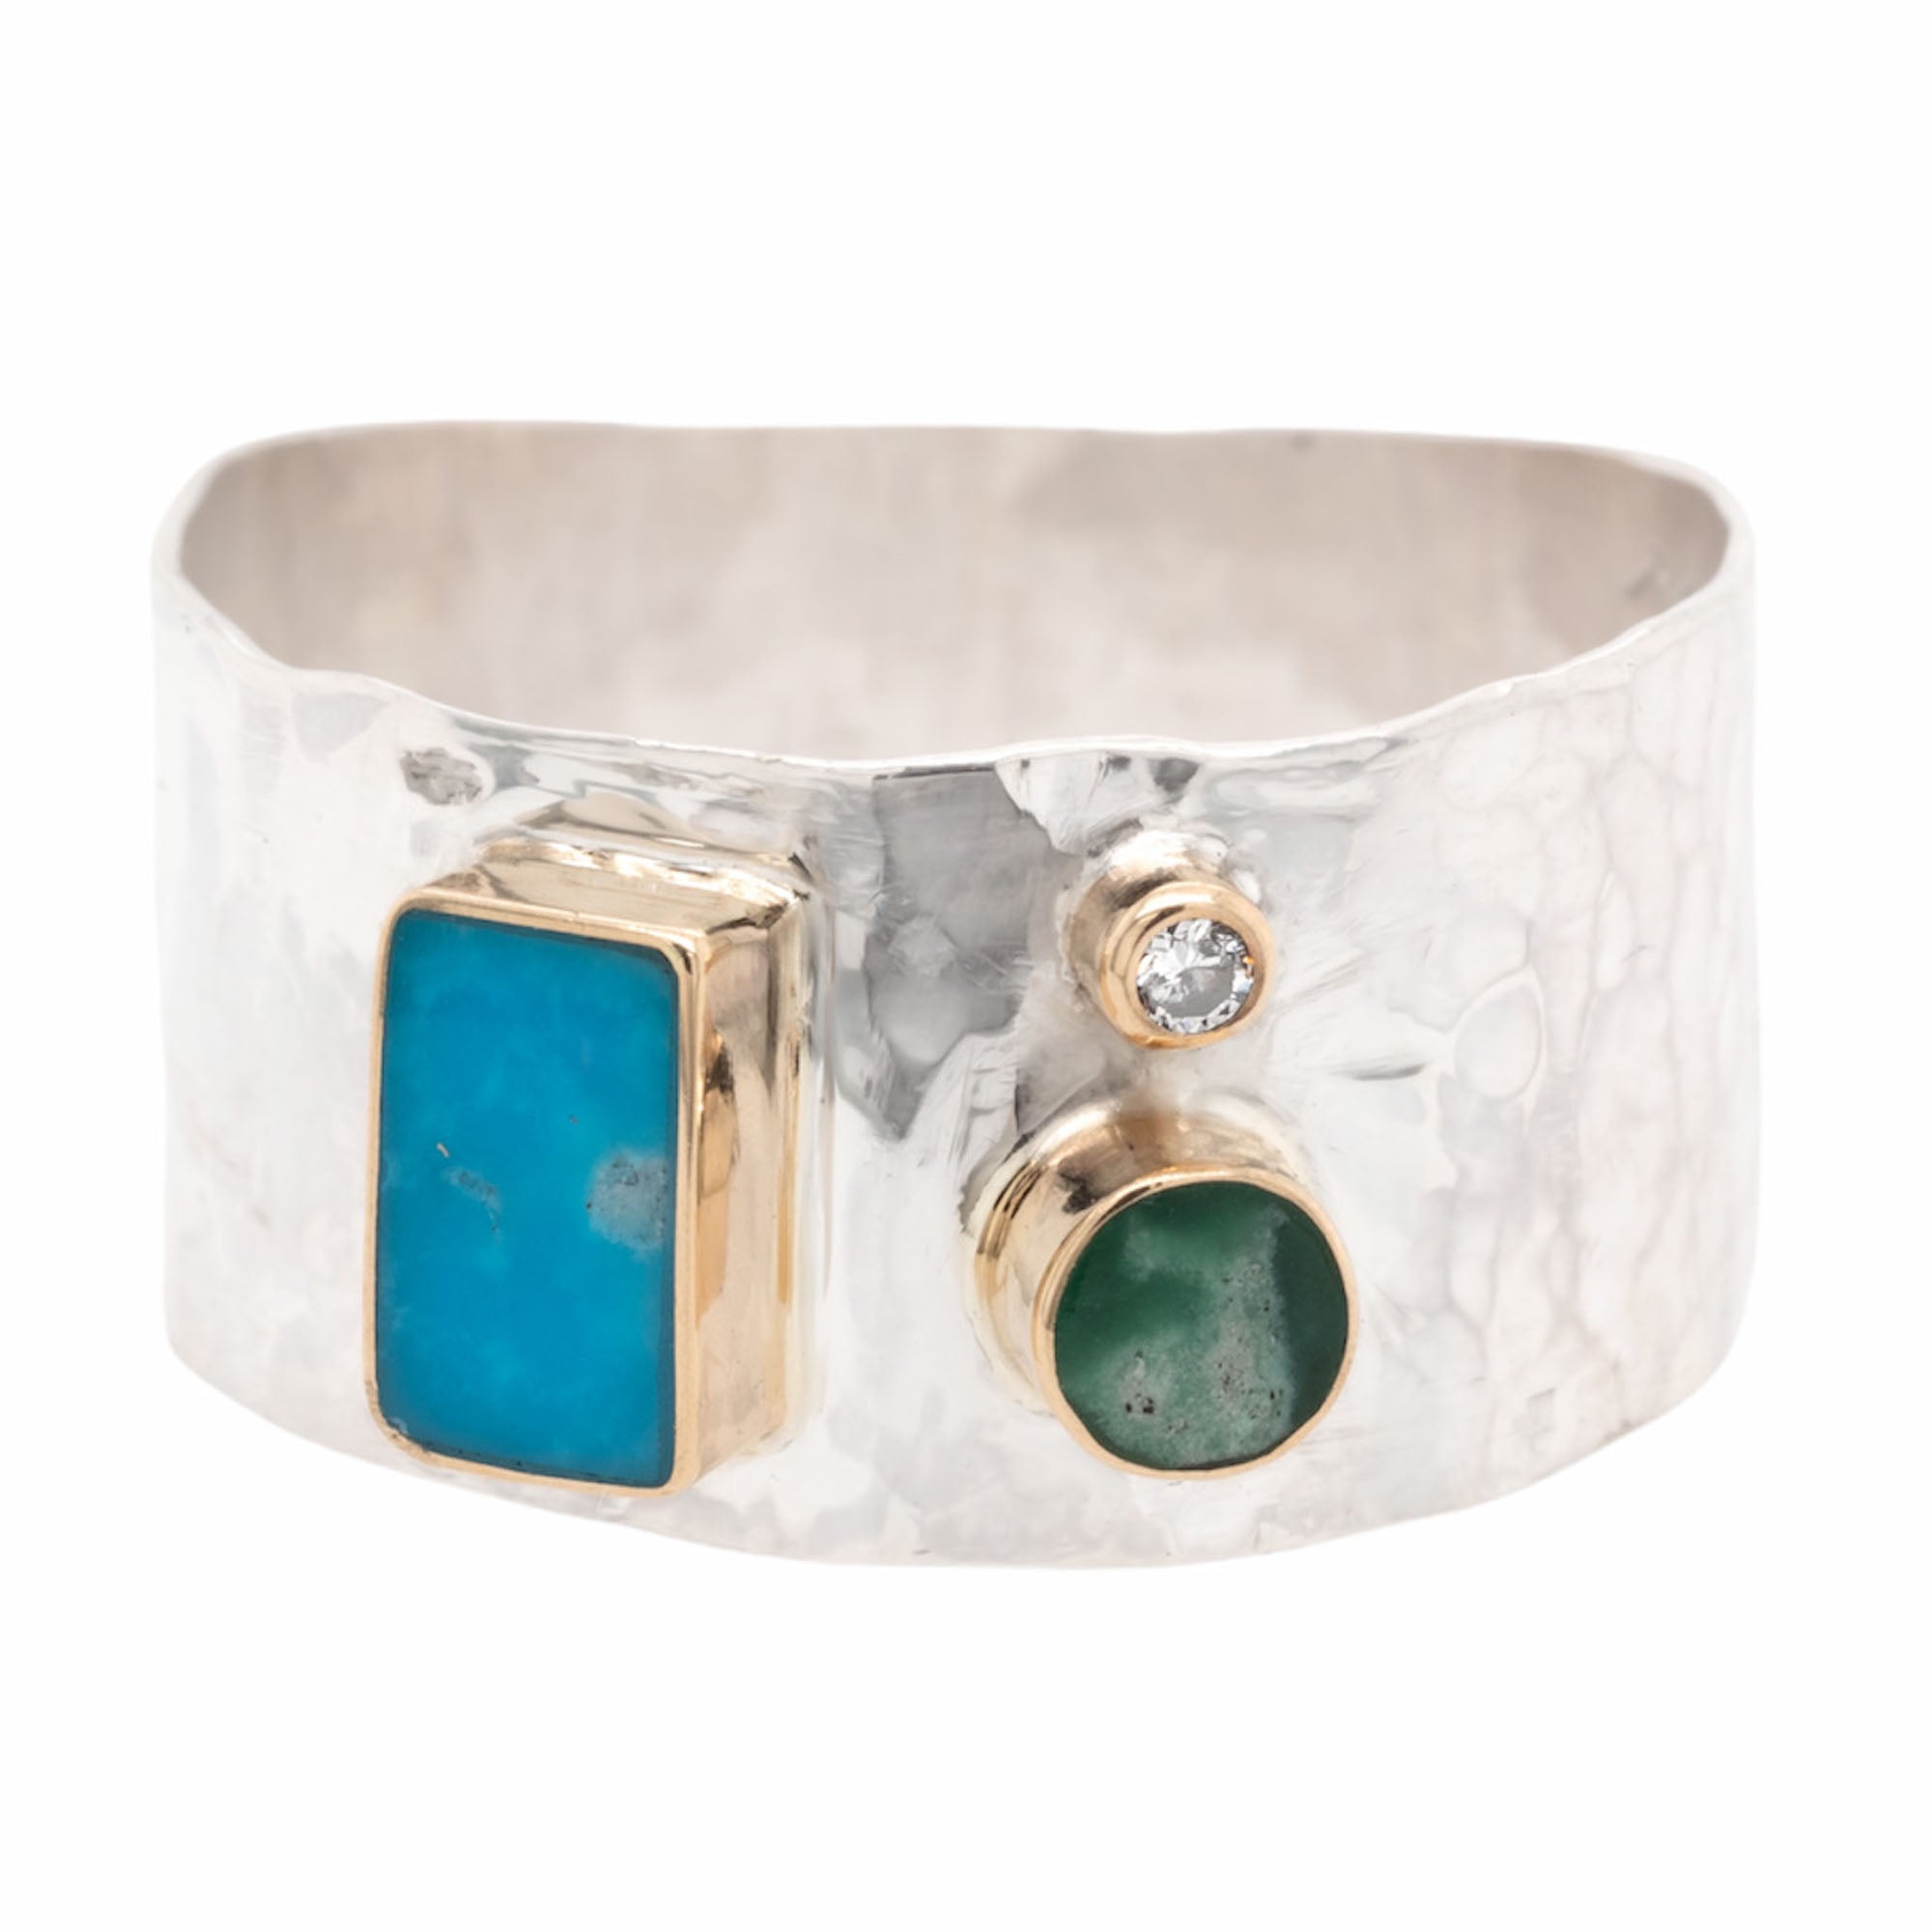 Variscite & Turquoise Medley Ring No. 1